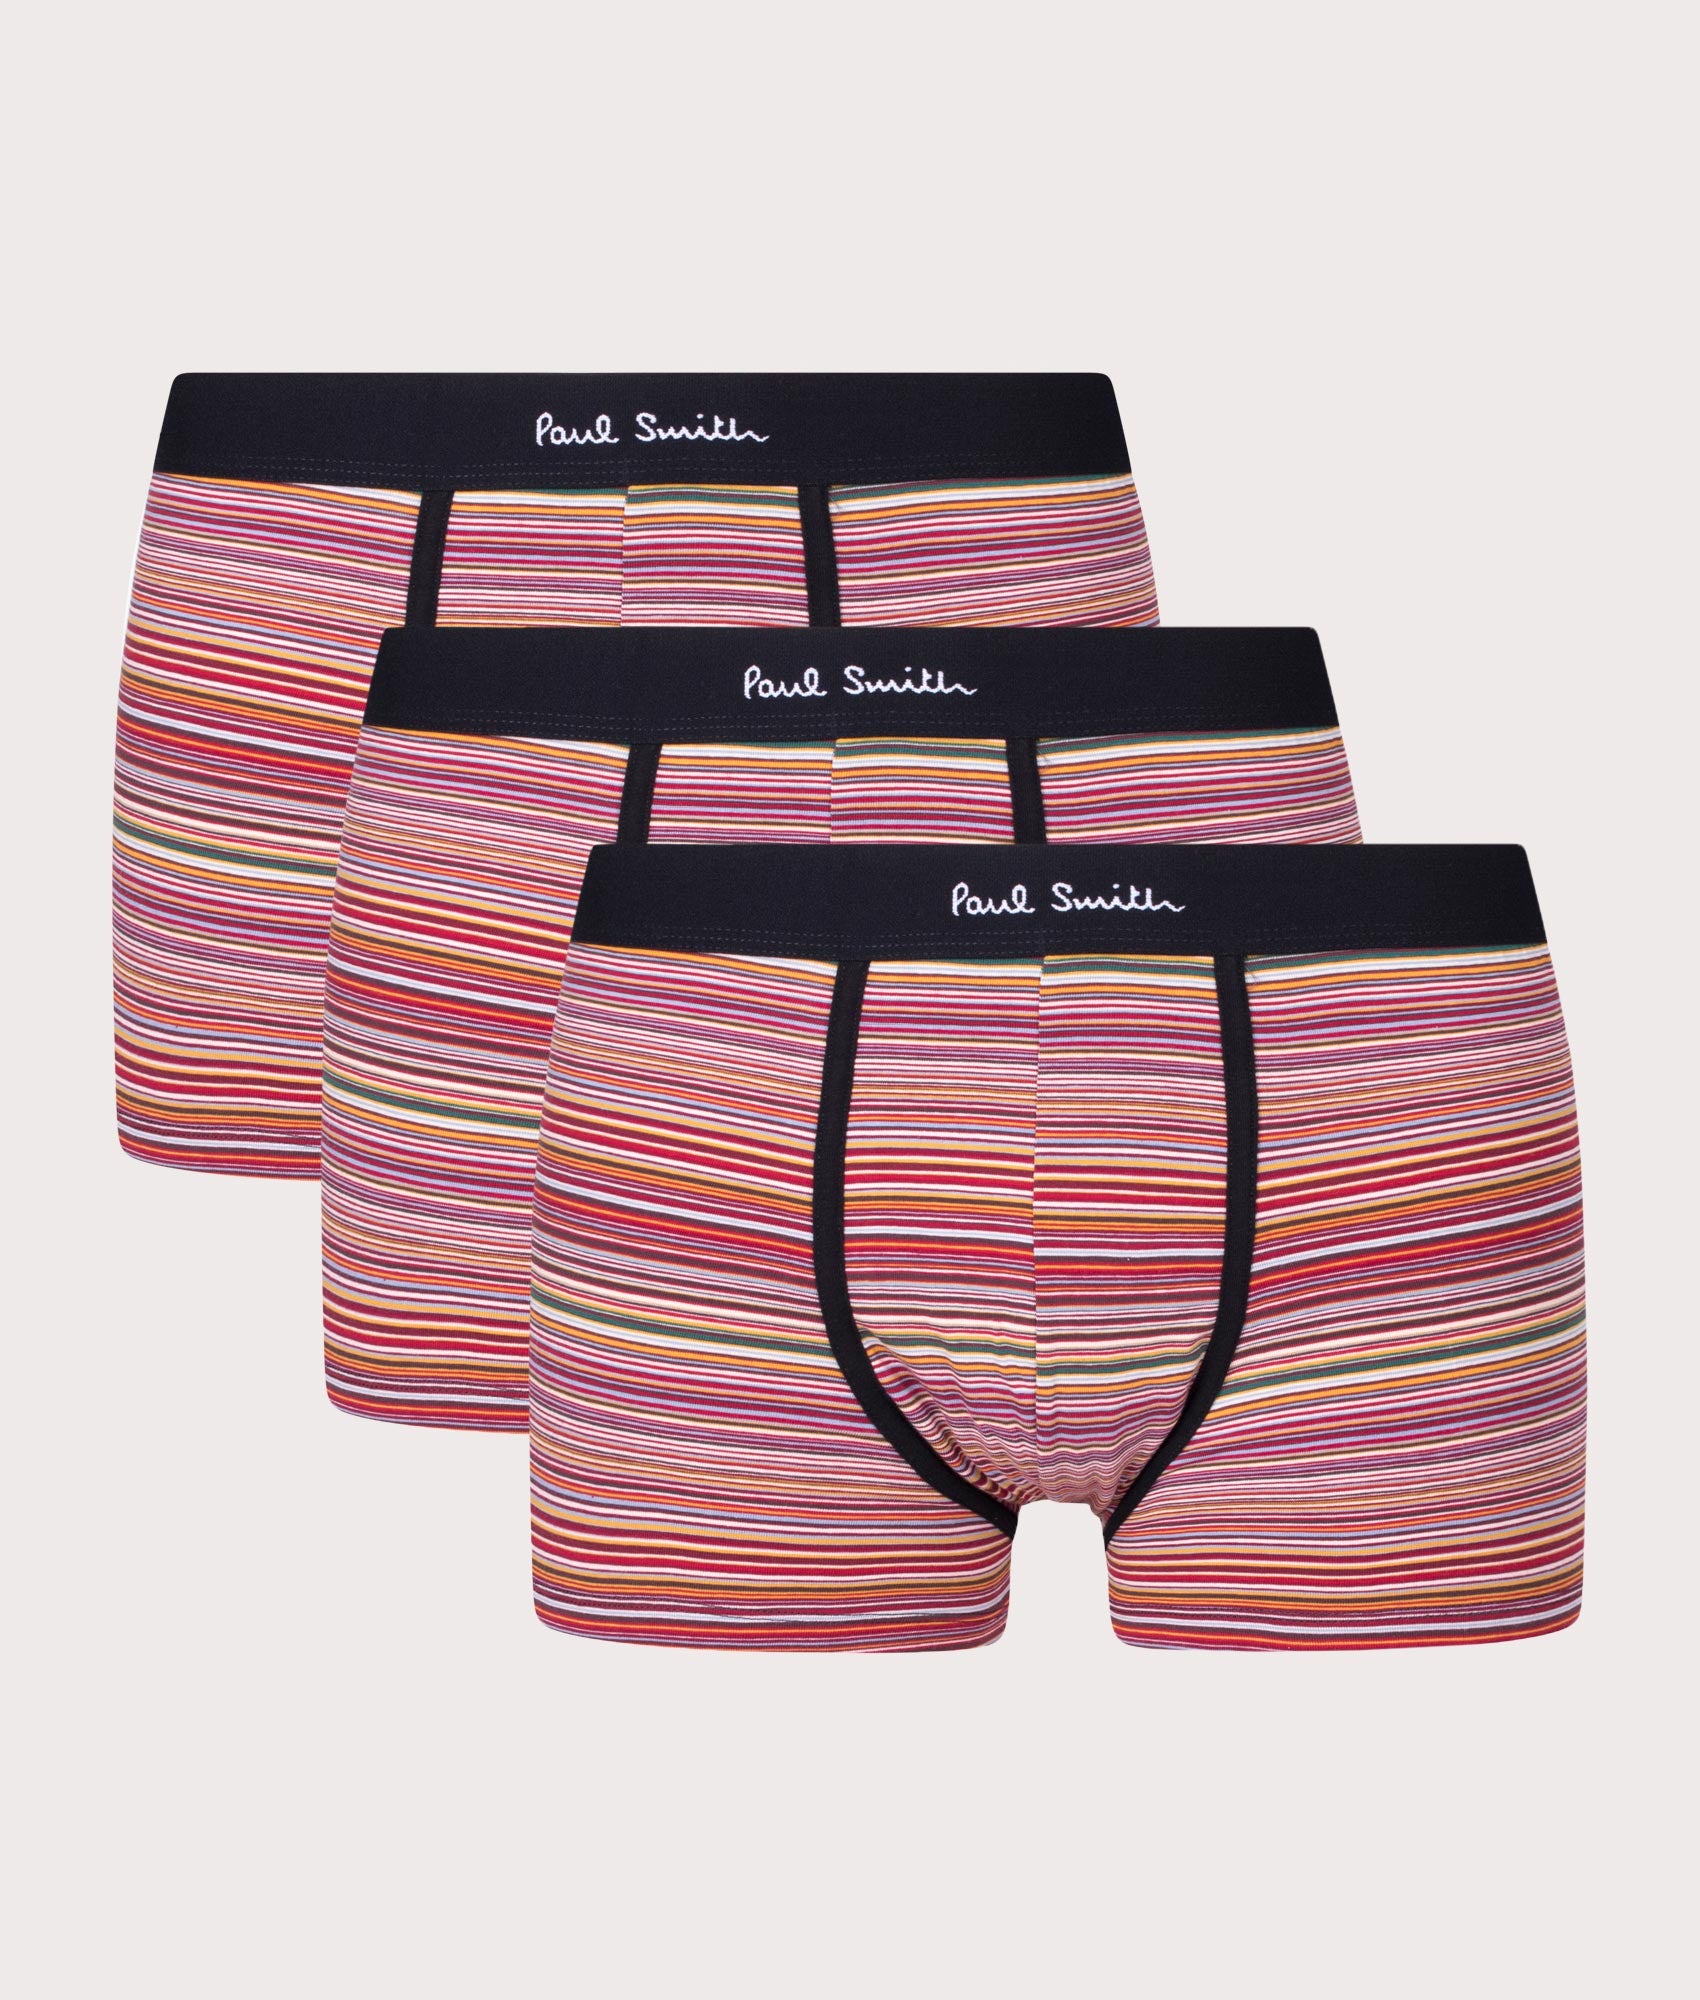 PS Paul Smith Mens Three Pack of Signature Stripe Trunks - Colour: 92A Multi - Size: XL